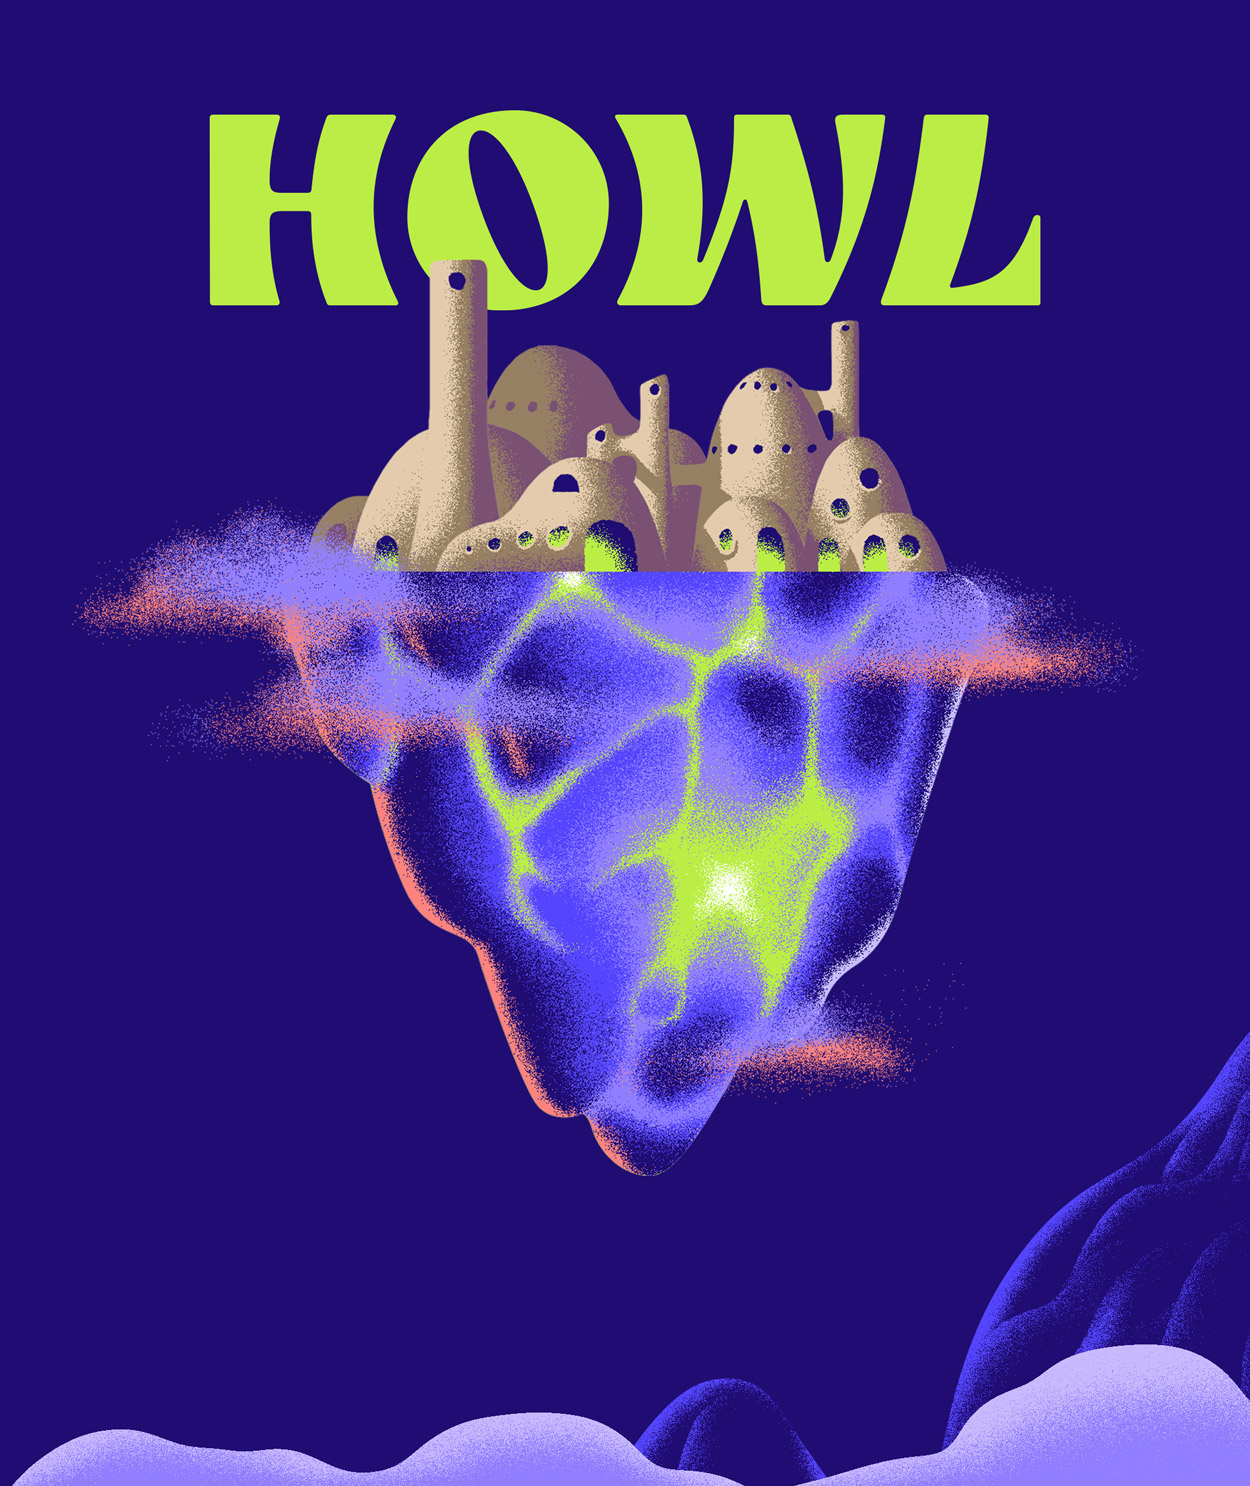 Howl_posters_city2